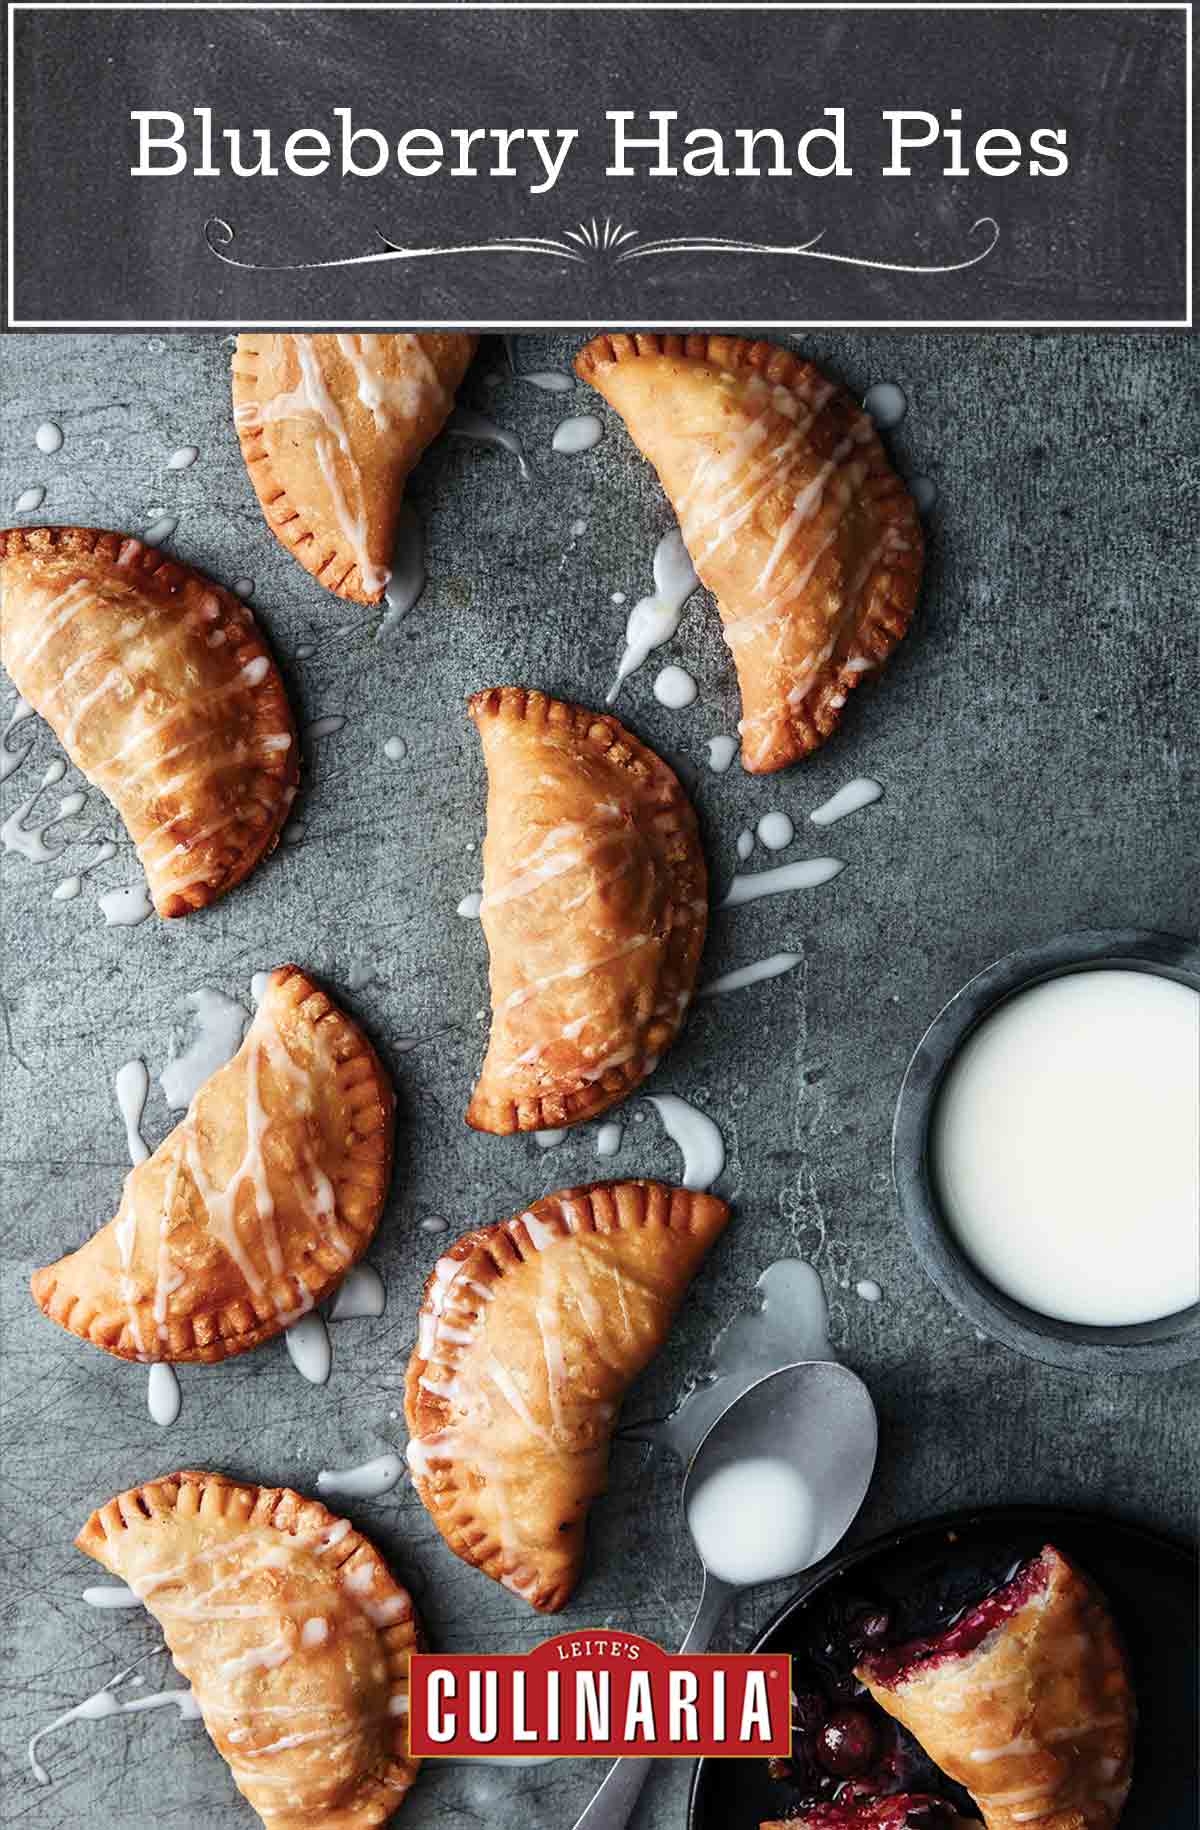 8 crescent-shape blueberry fried pies with Meyer lemon drizzle sauce nearby all on a piece of slate